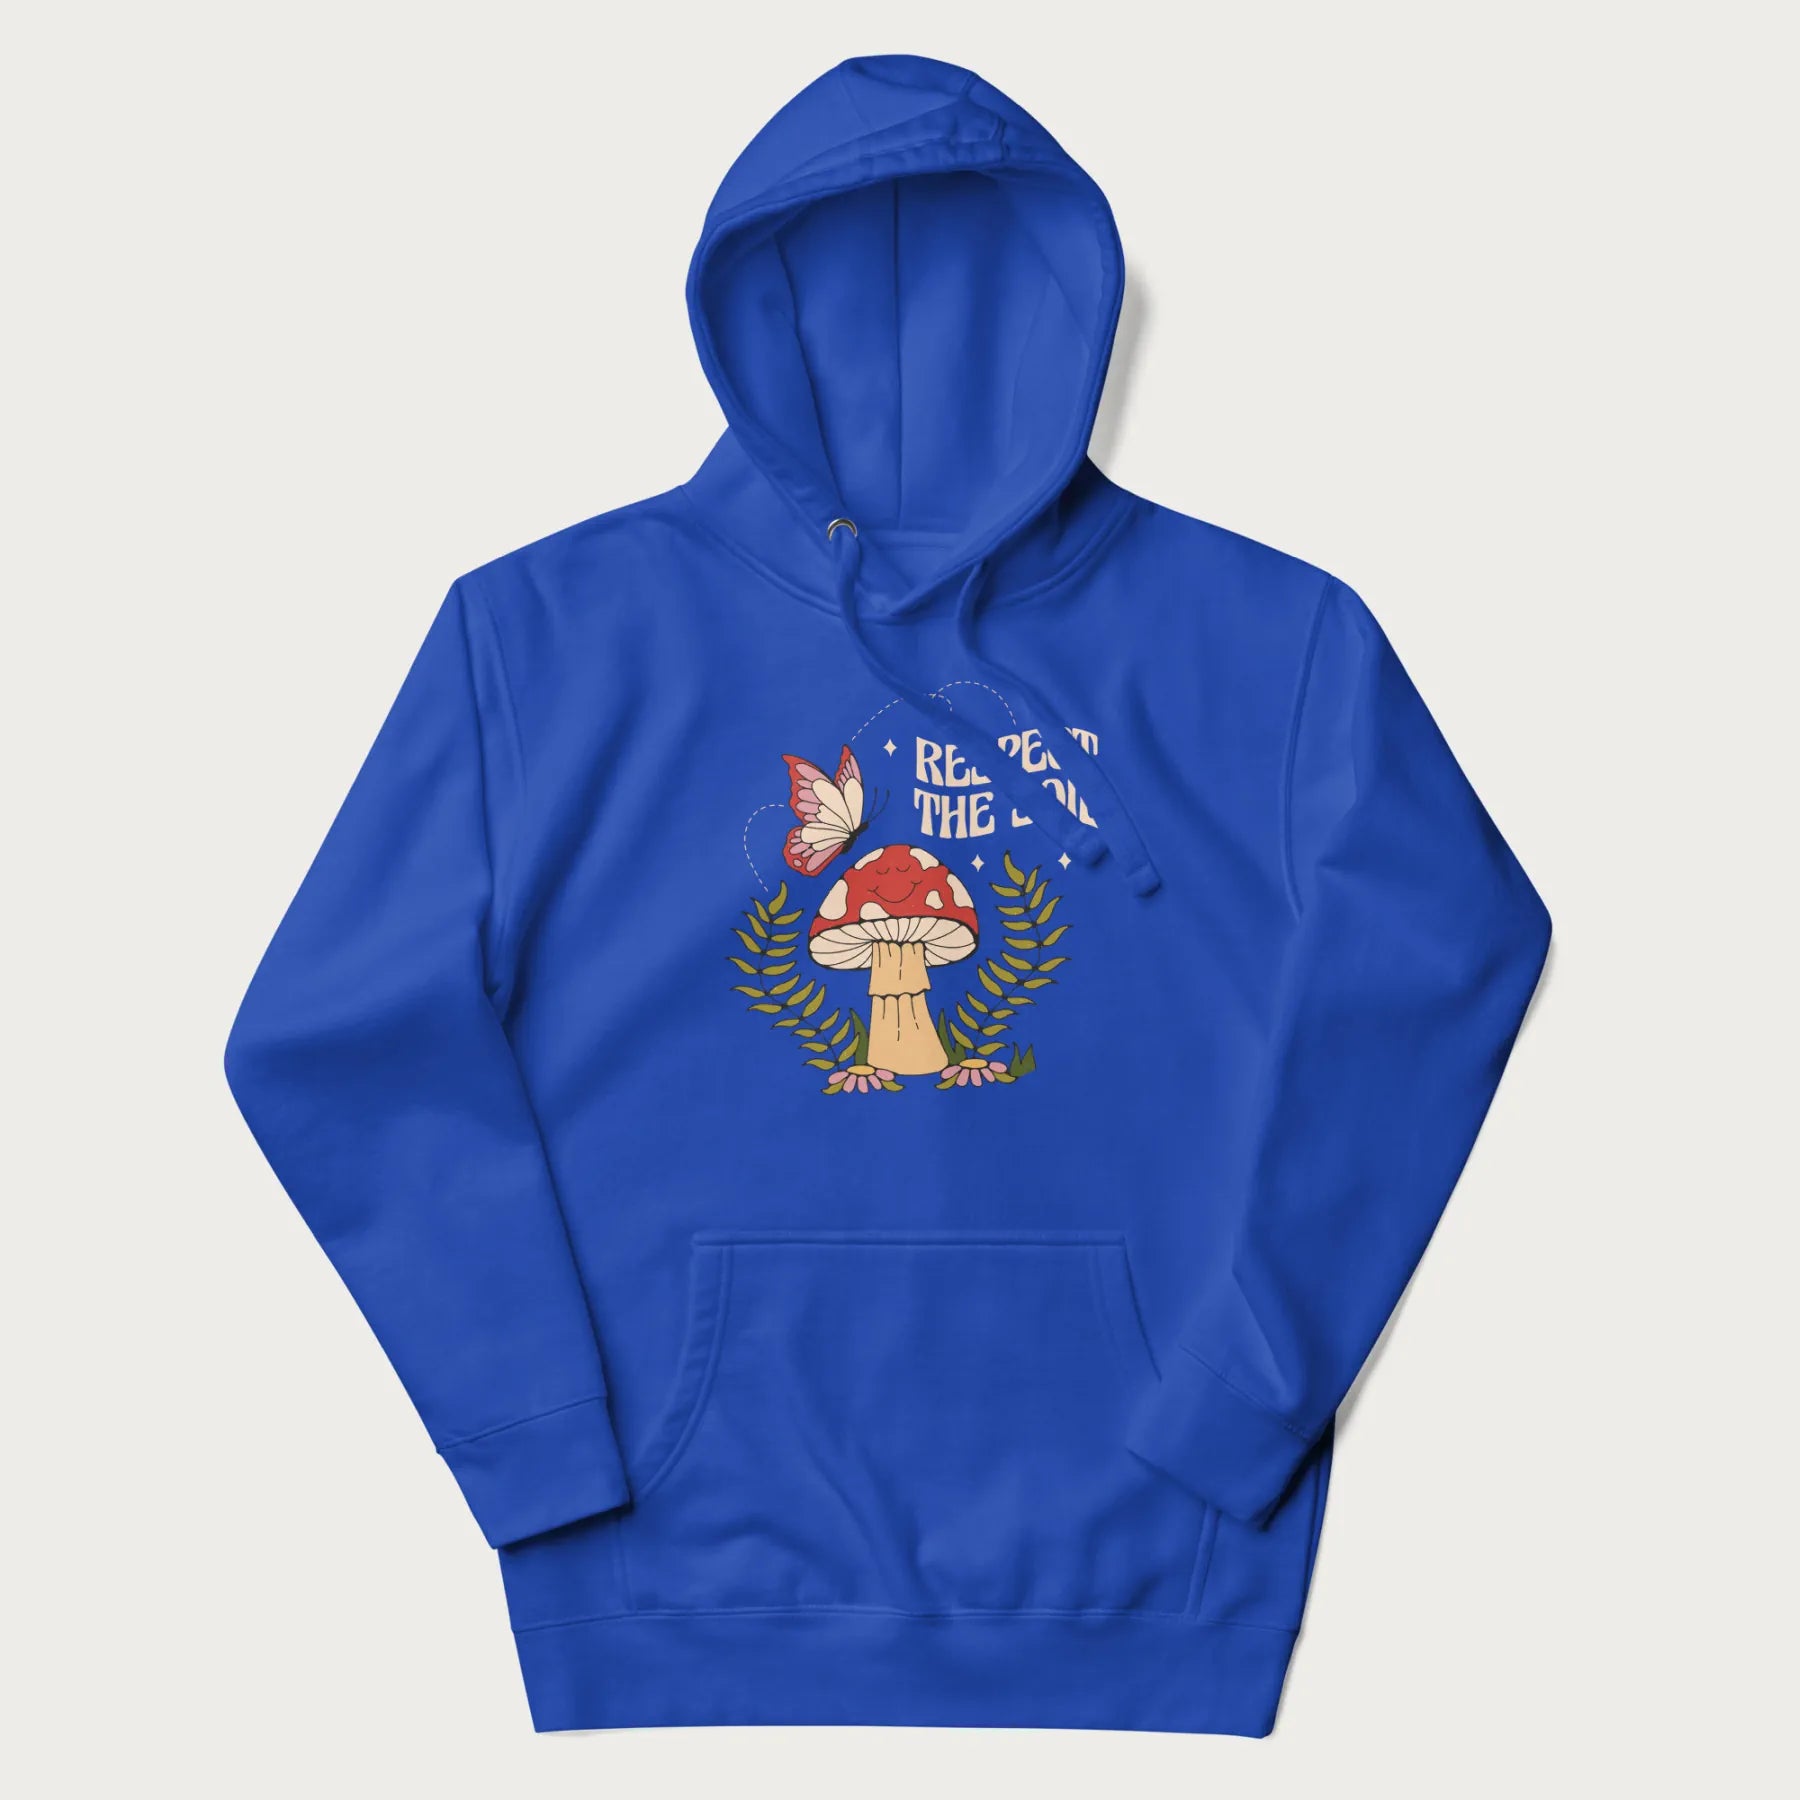 Royal blue hoodie with mushroom and butterfly design, with the text 'Respect the Soil' above it. 